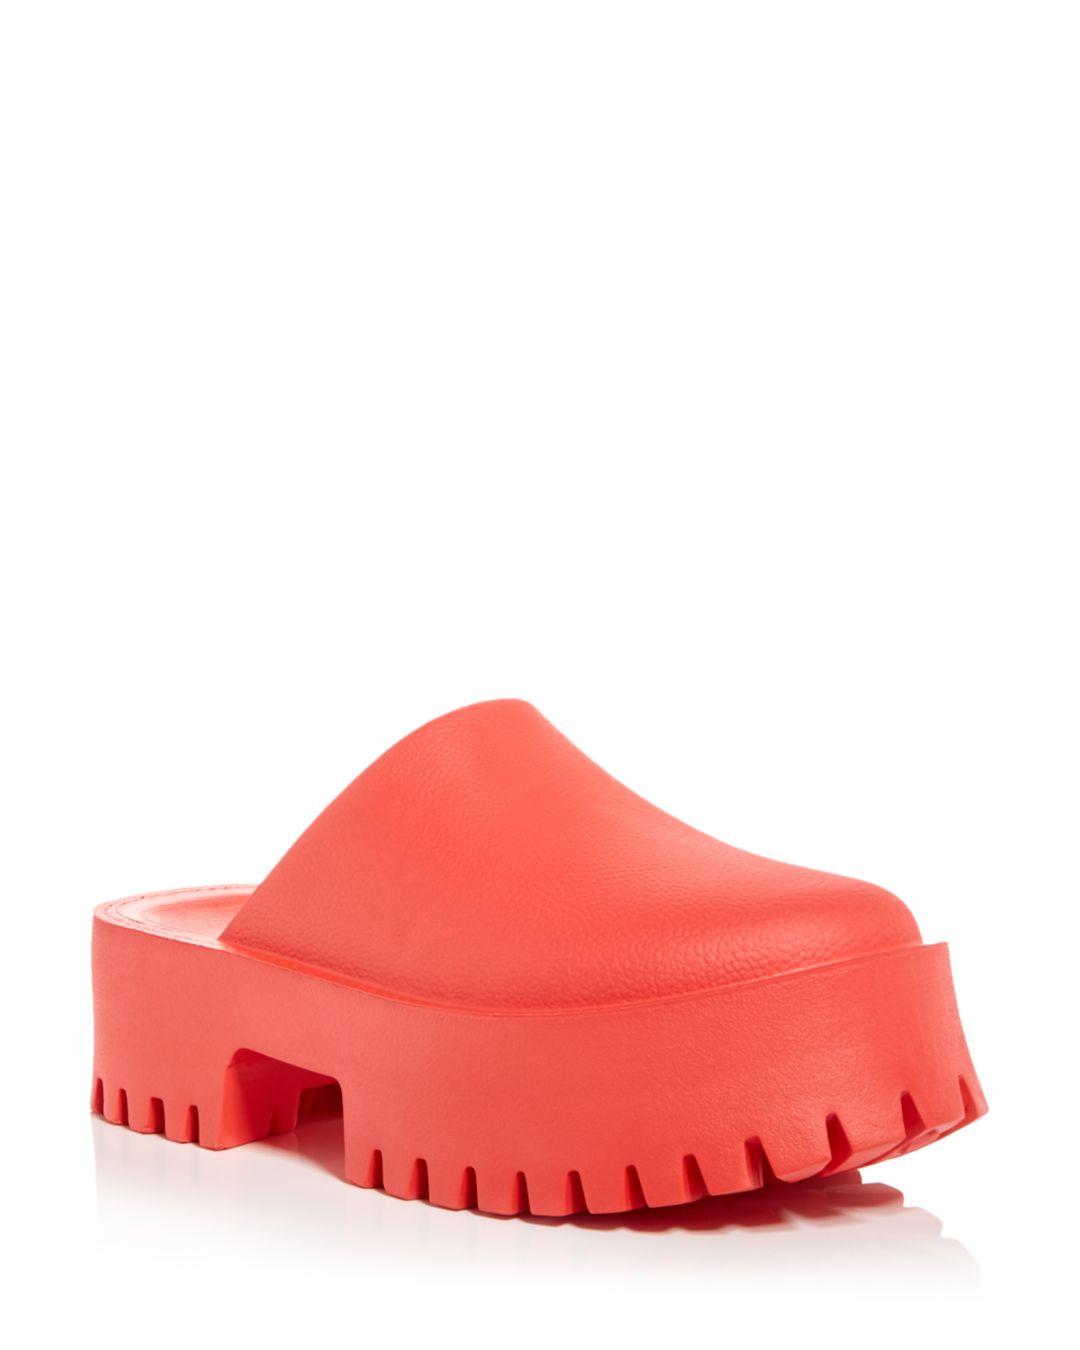 Jeffrey Campbell Clogge Platform Clogs in Red | Lyst